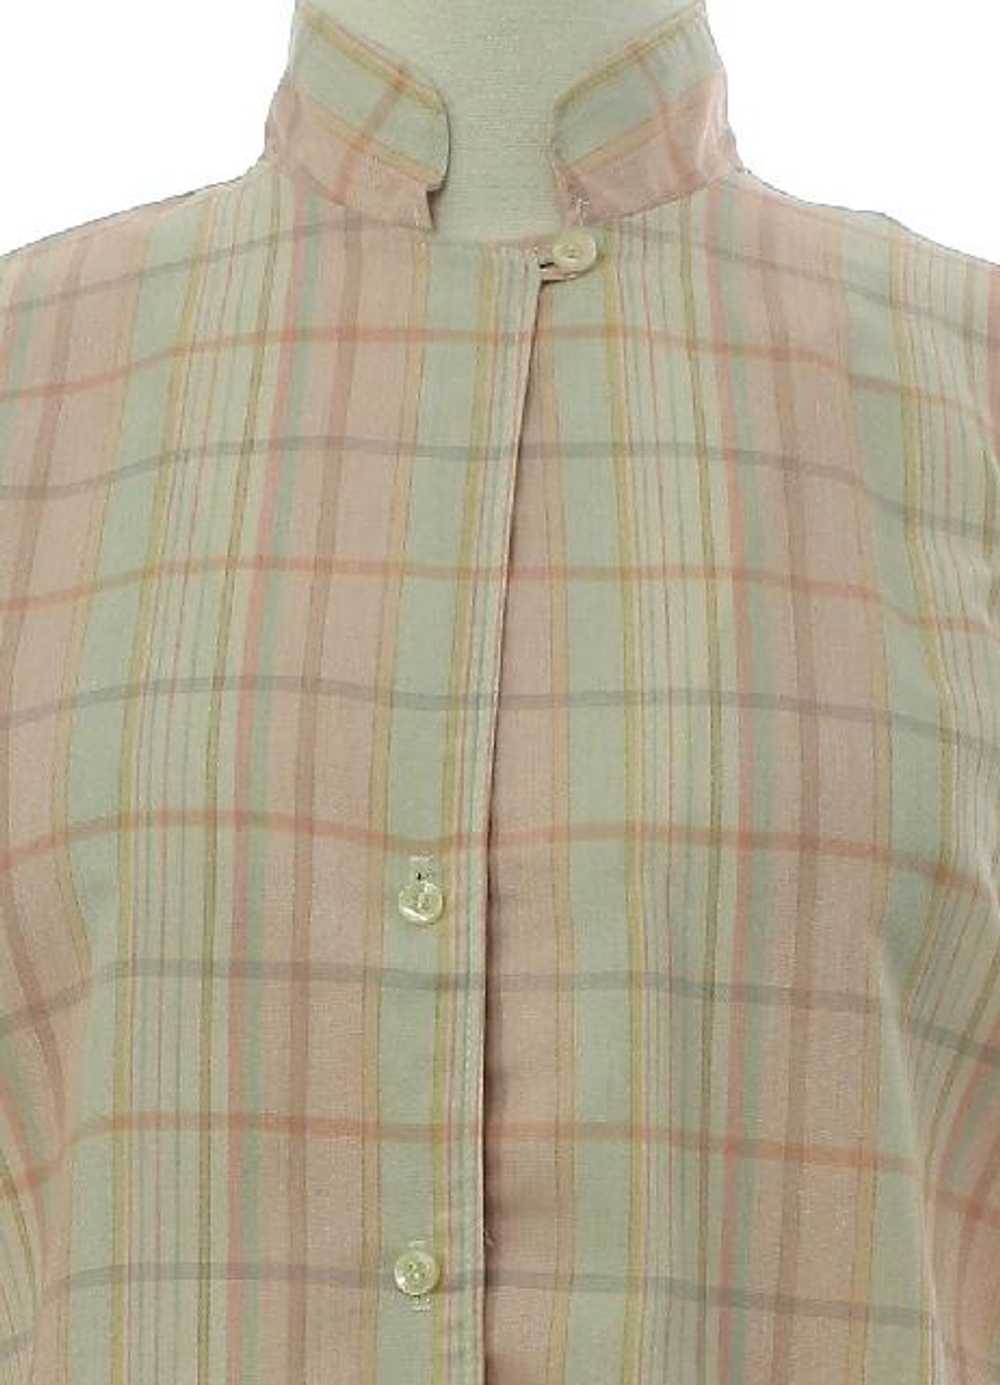 1980's White Stag Womens Mod Shirt - image 2